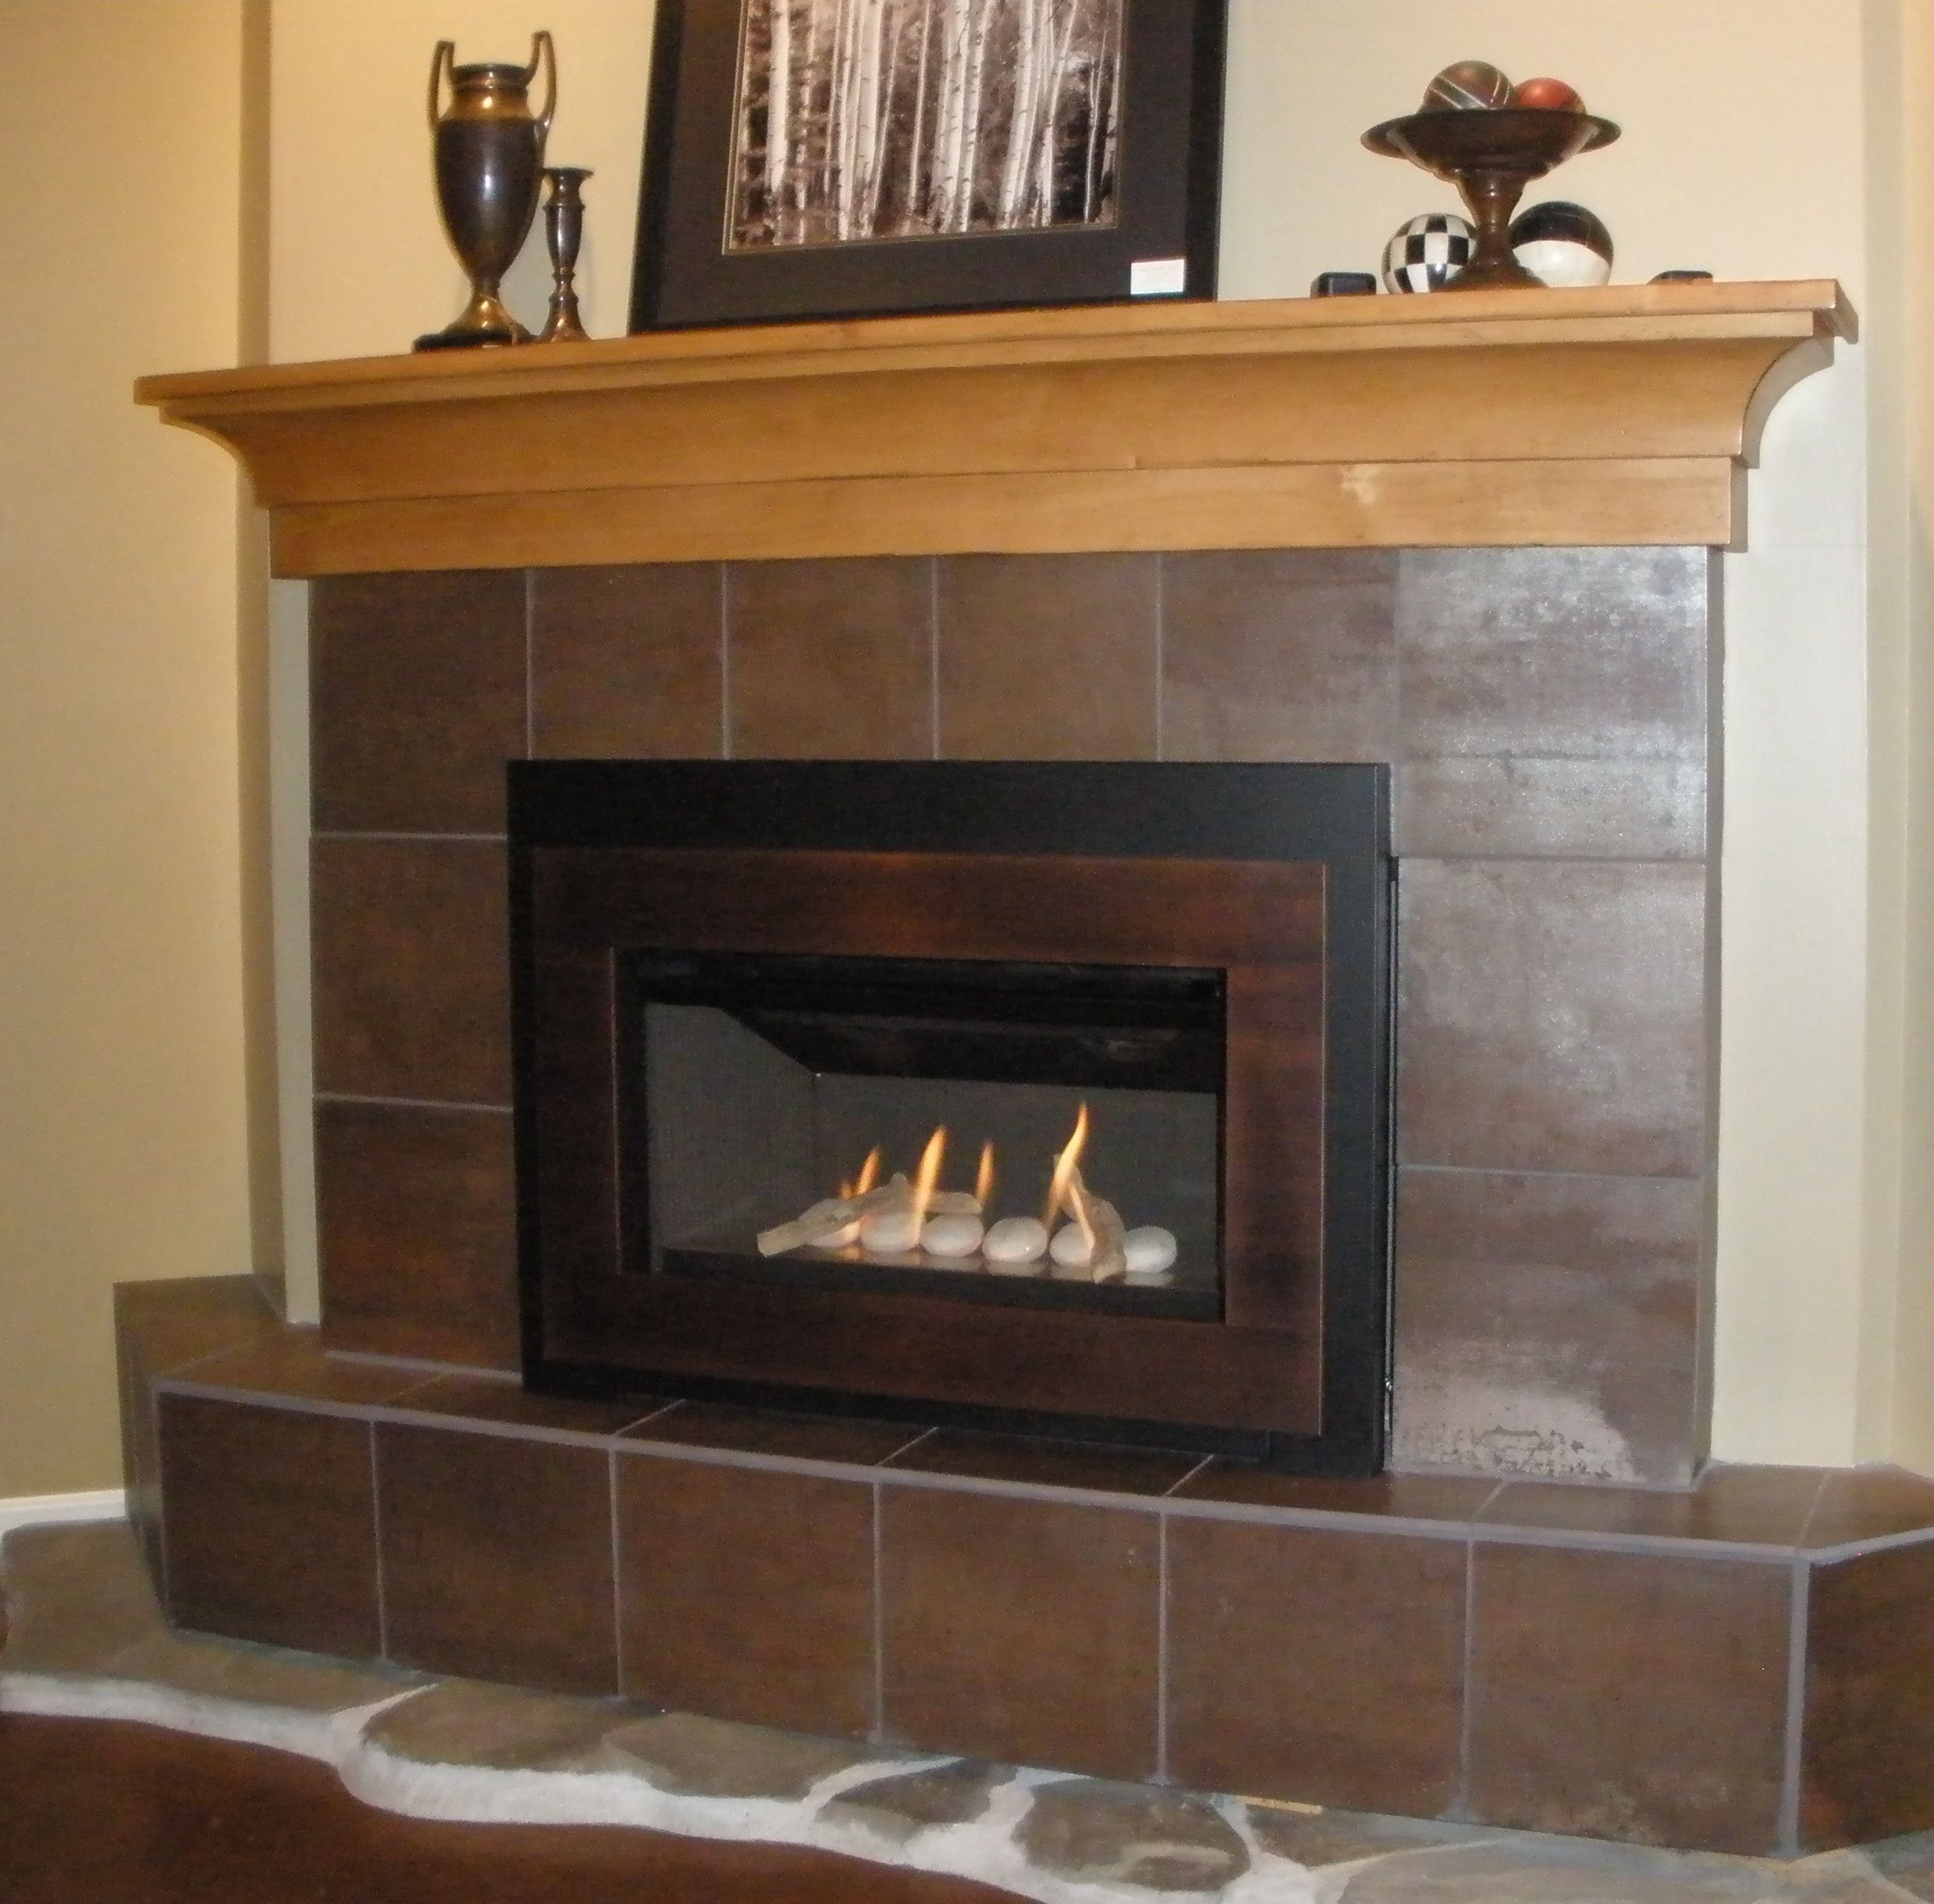 How to Vent A Gas Fireplace Fresh Pin On Valor Radiant Gas Fireplaces Midwest Dealer